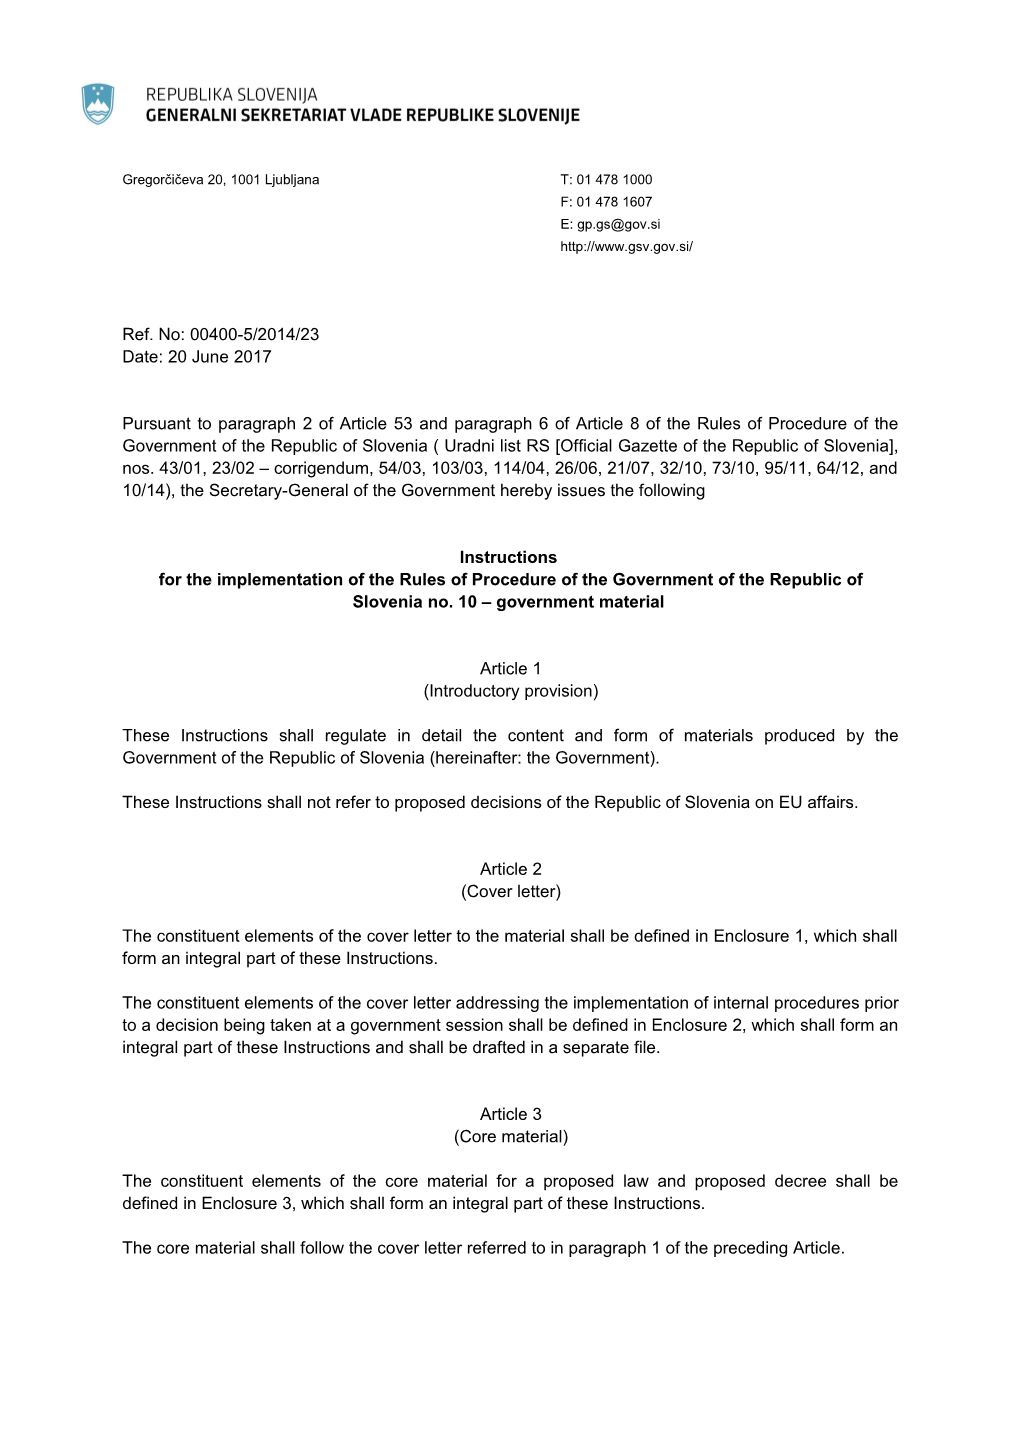 For the Implementation of the Rules of Procedure of the Government of the Republic Of